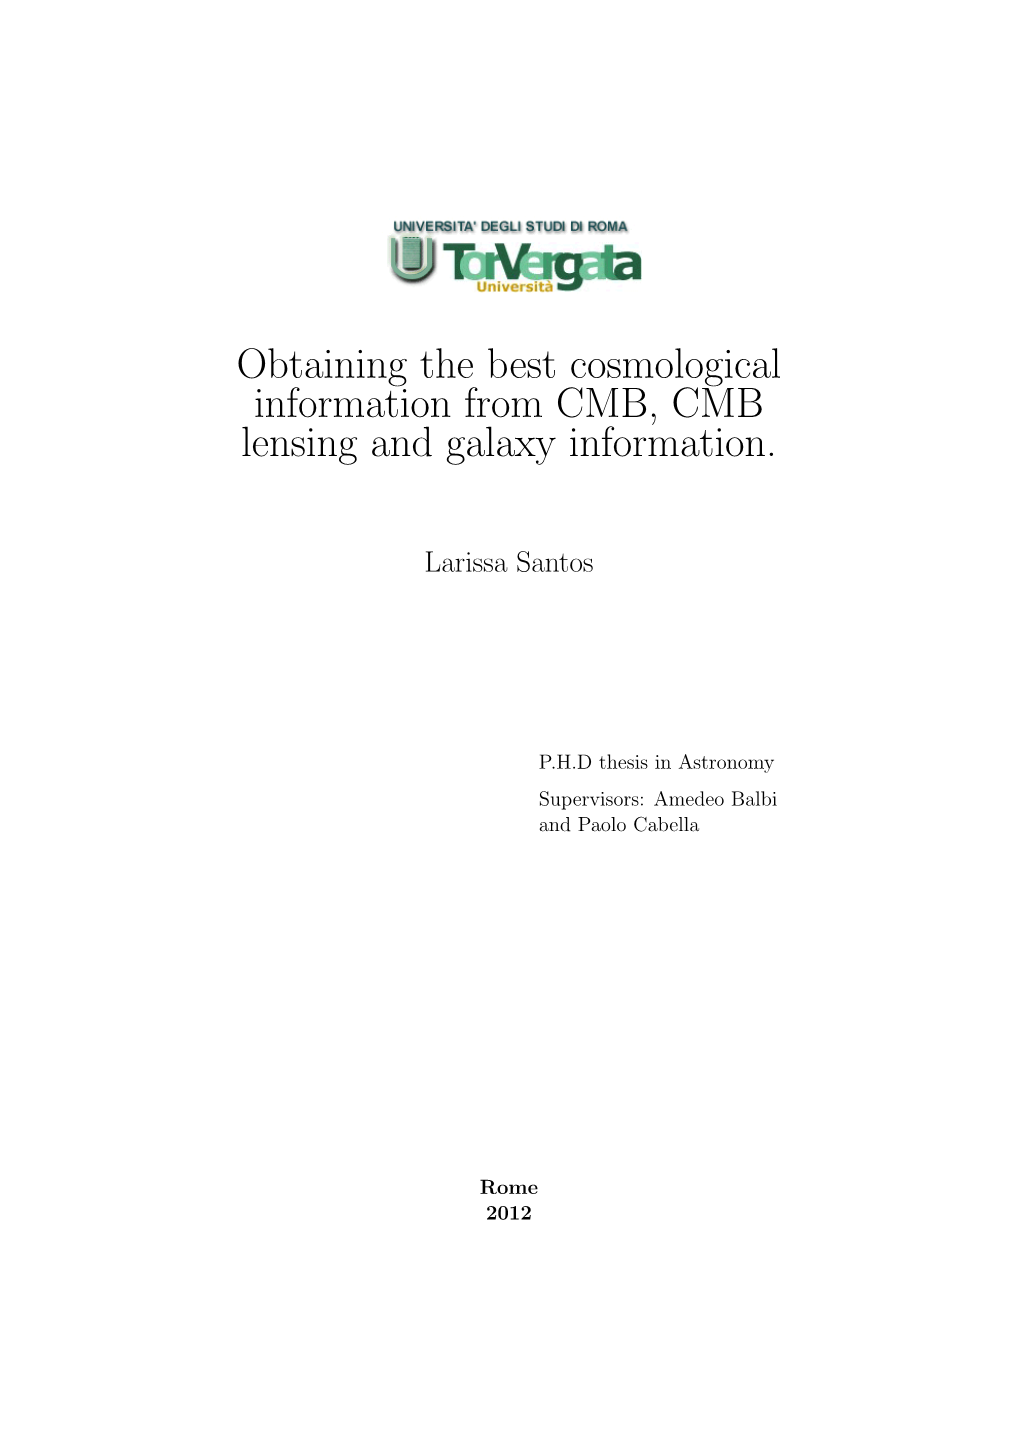 Obtaining the Best Cosmological Information from CMB, CMB Lensing and Galaxy Information